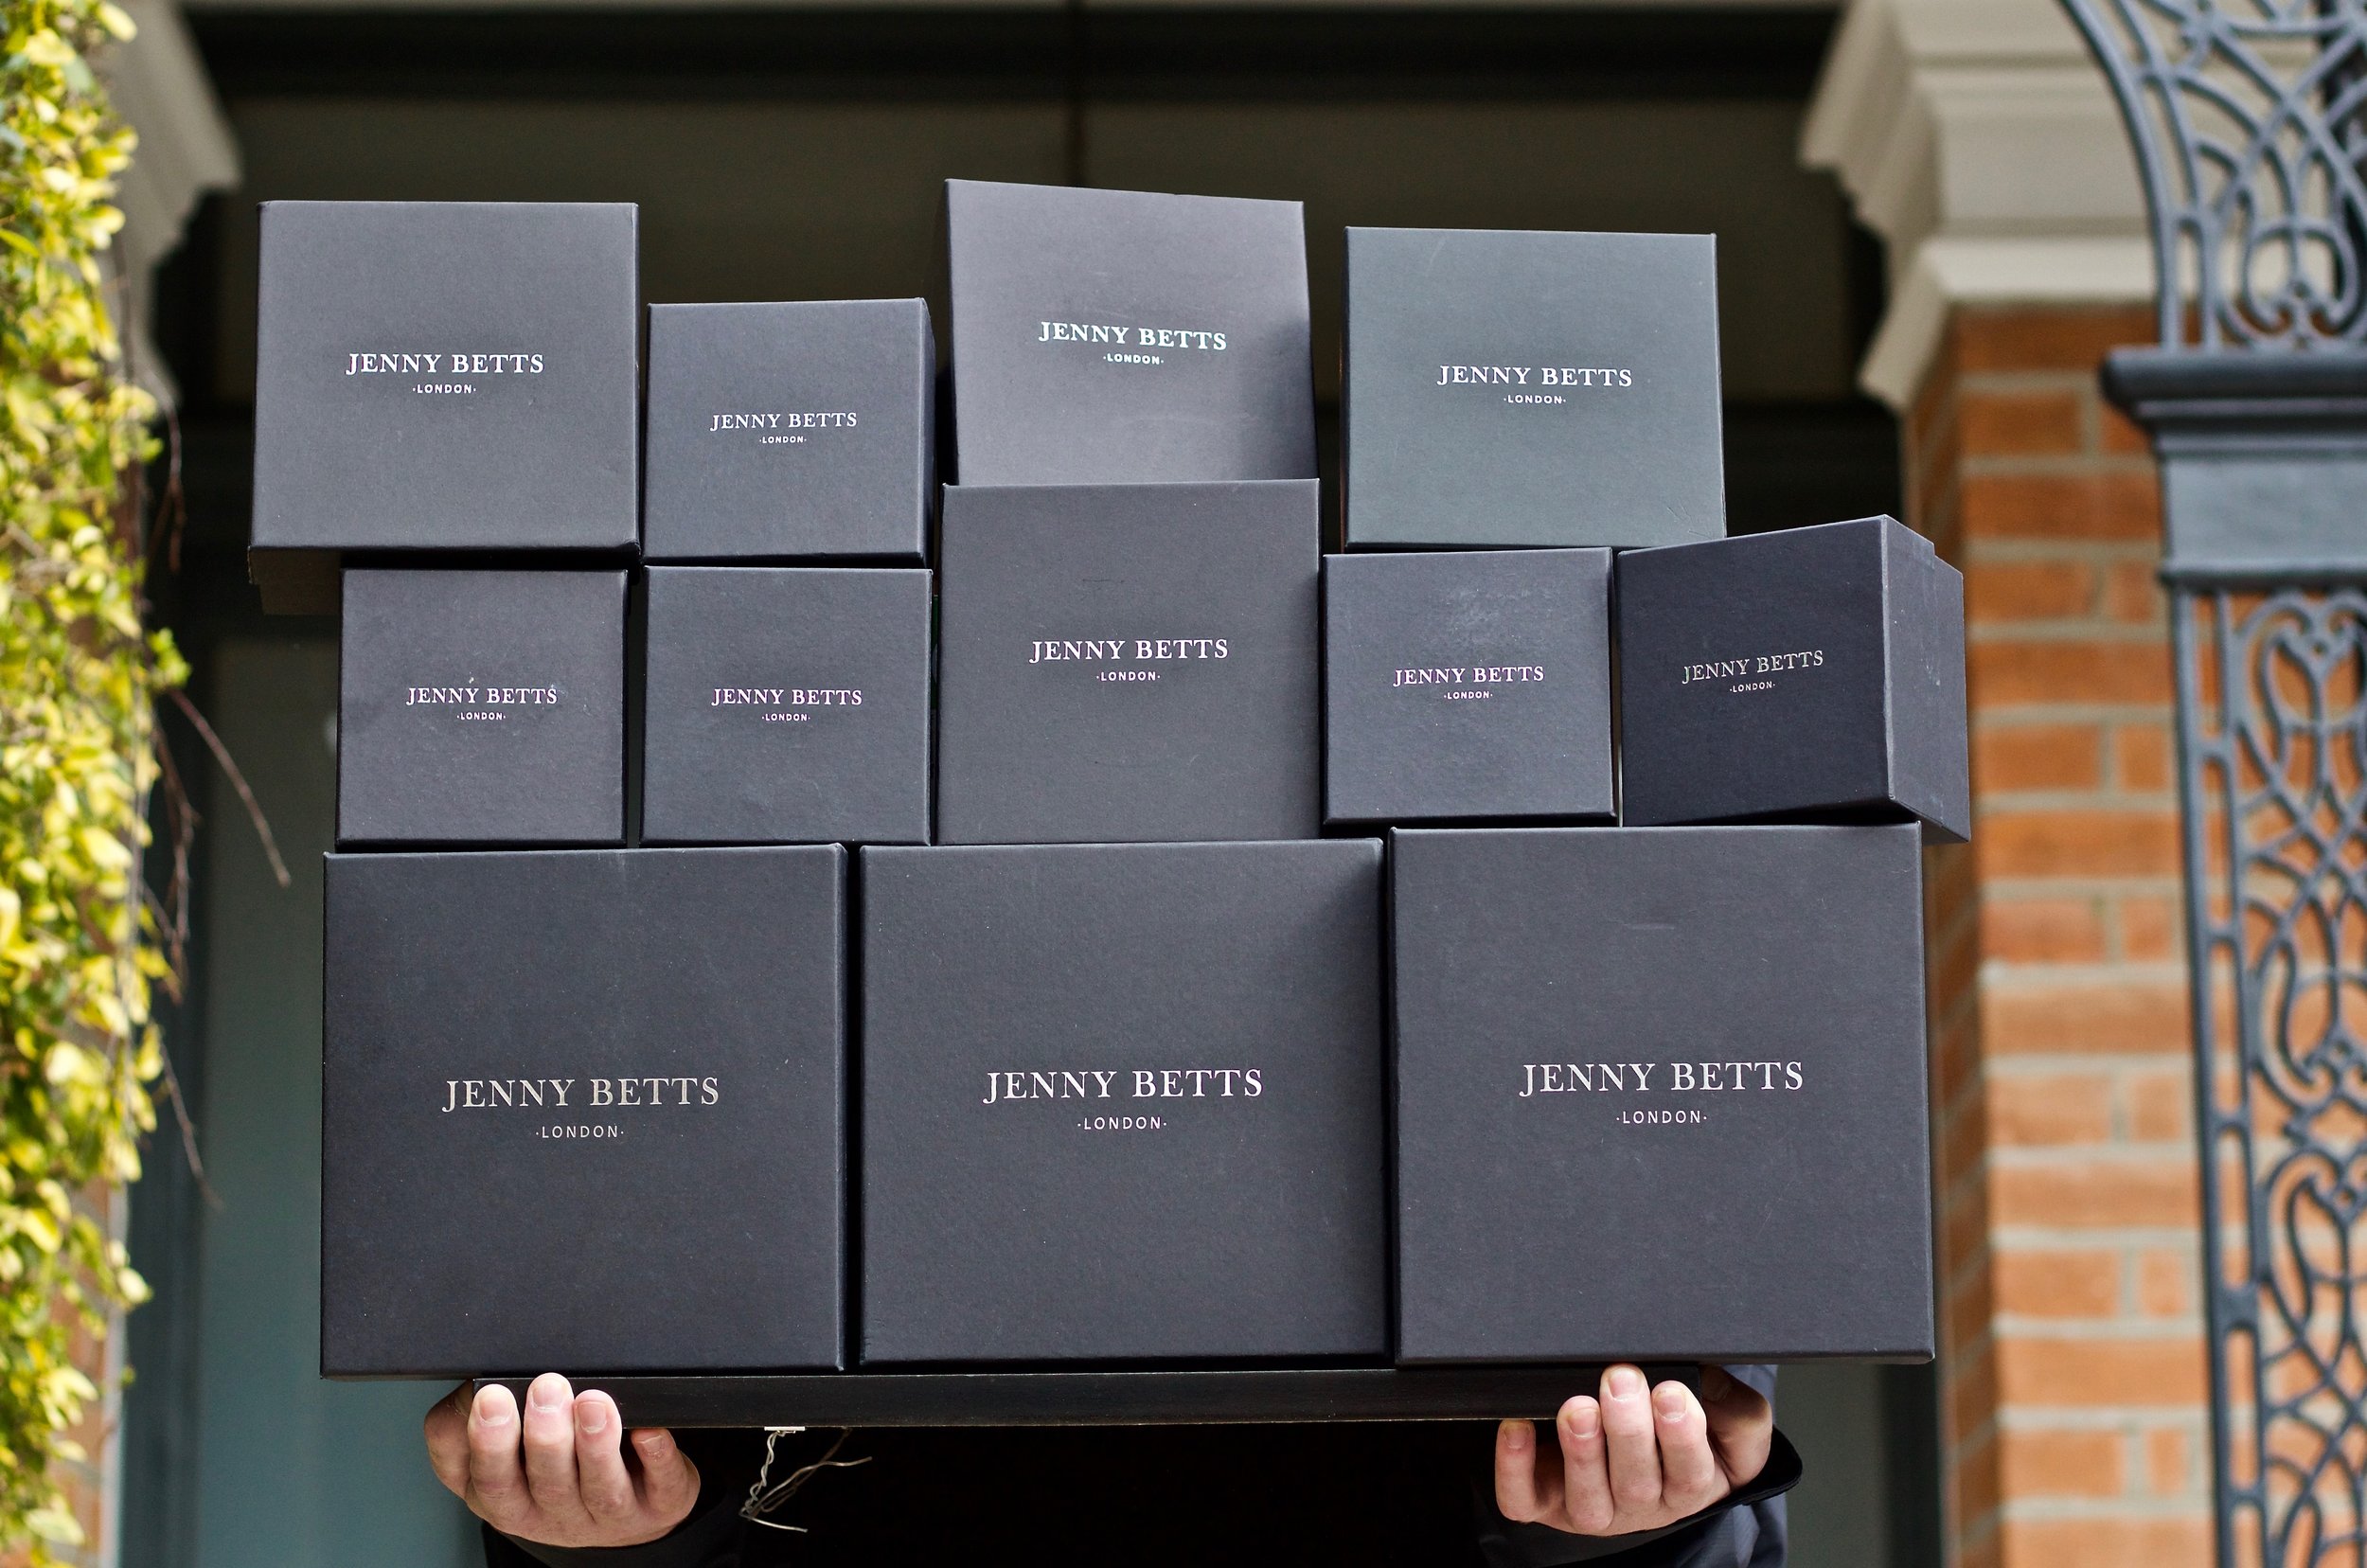 Jenny Betts London fragrances and candles in Battersea South West London 10.jpg